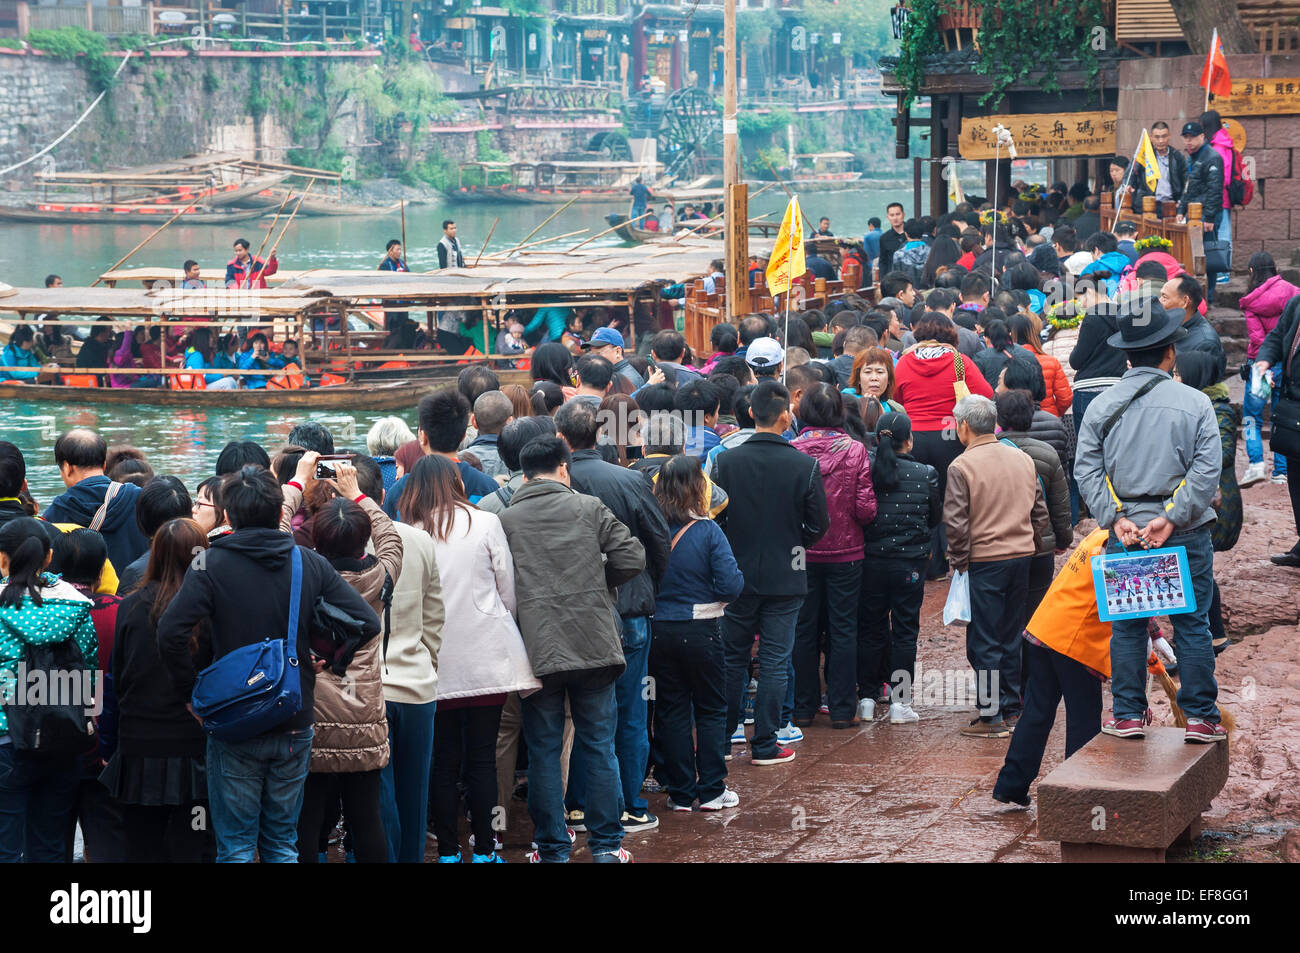 Crowds of Chinese tourists wait for boats to take them along the Tuojiang River in Fenghuang, China Stock Photo